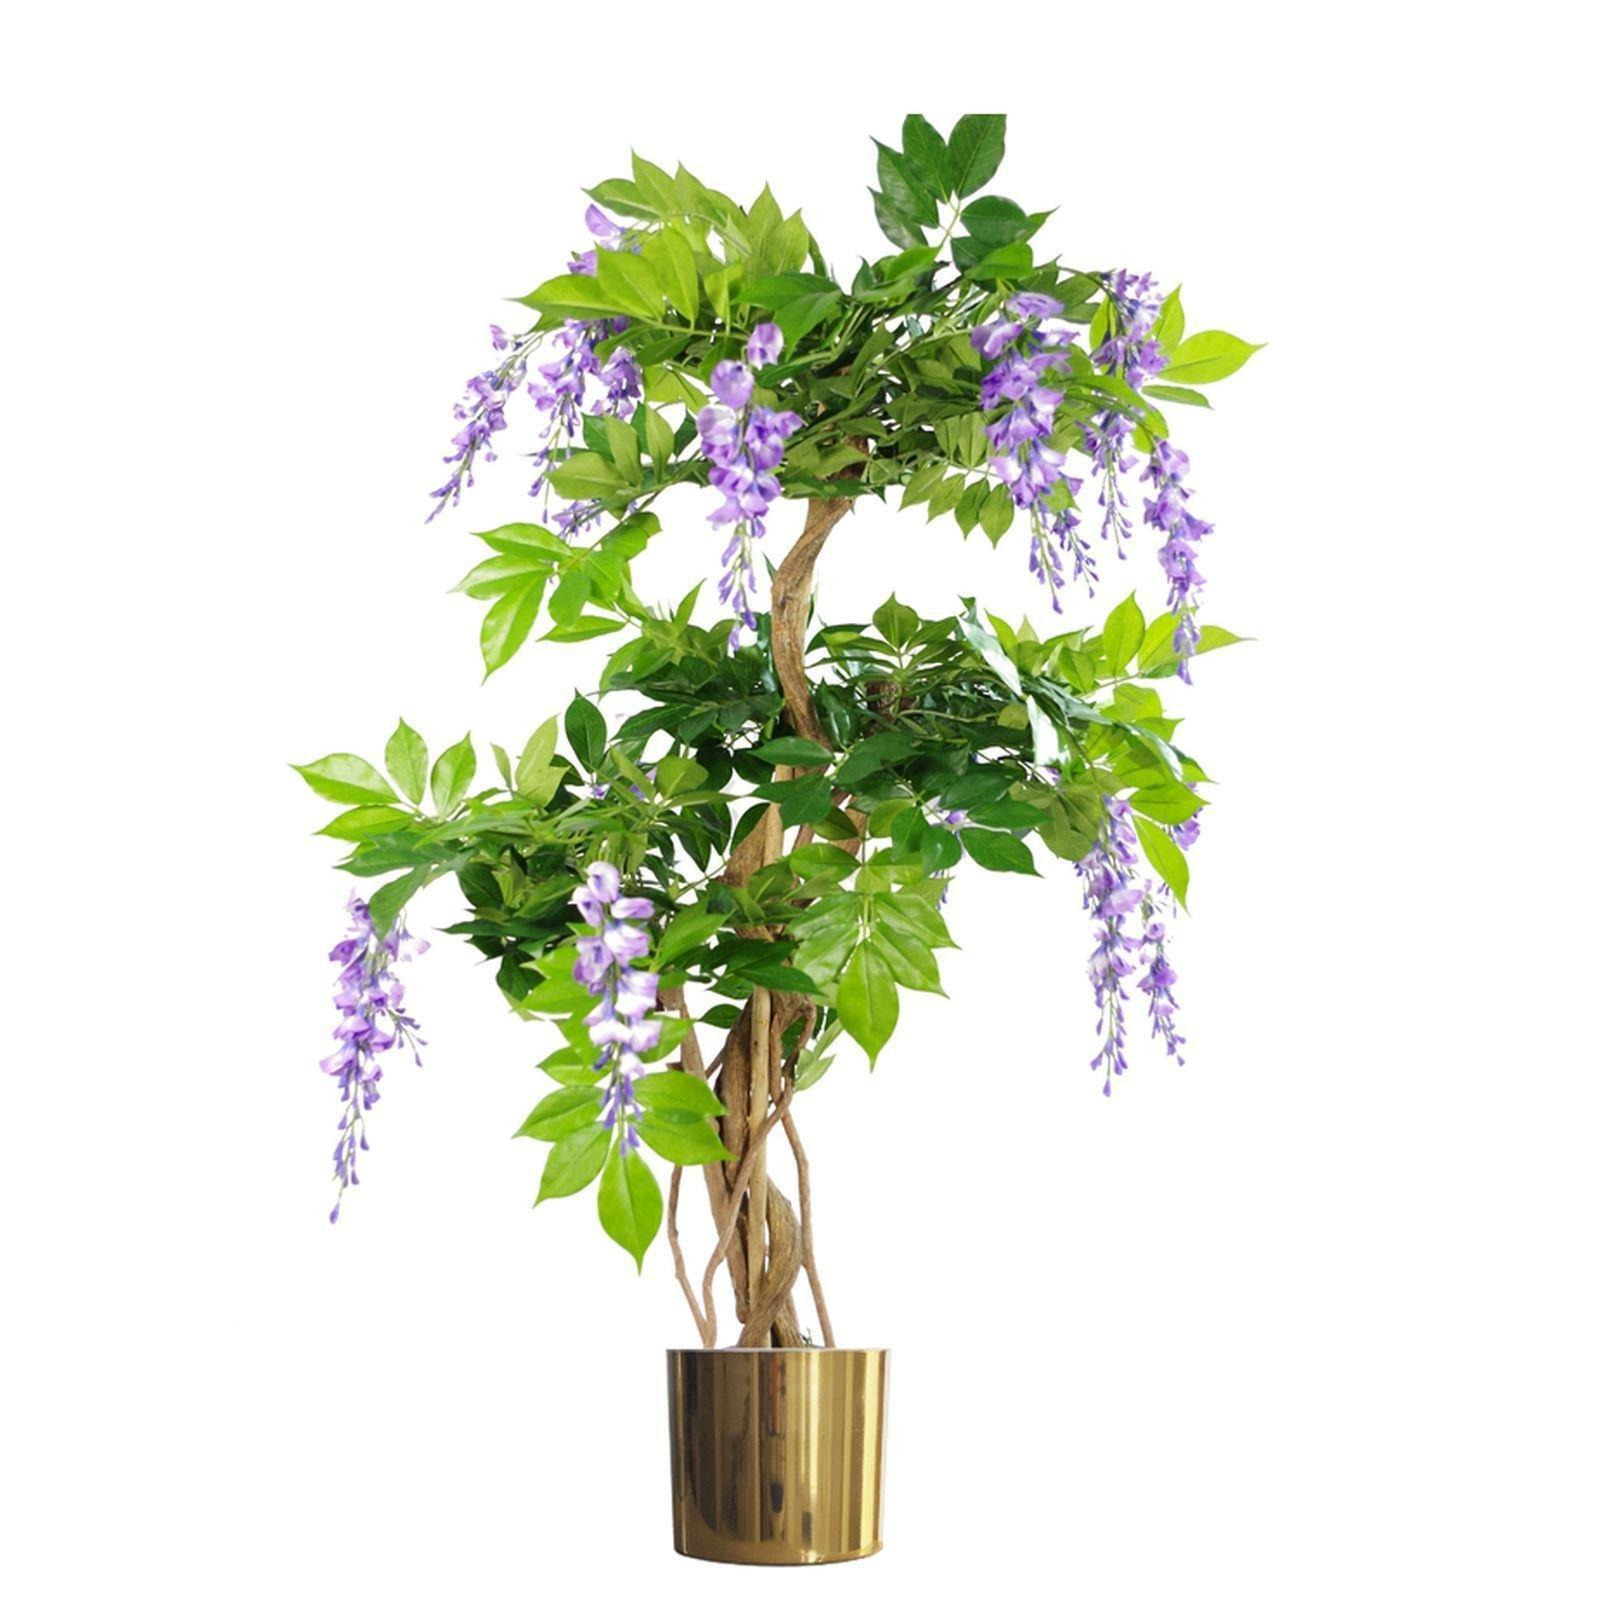 110cm Artificial Purple Wisteria Tree with Gold Metal Planter - image 1